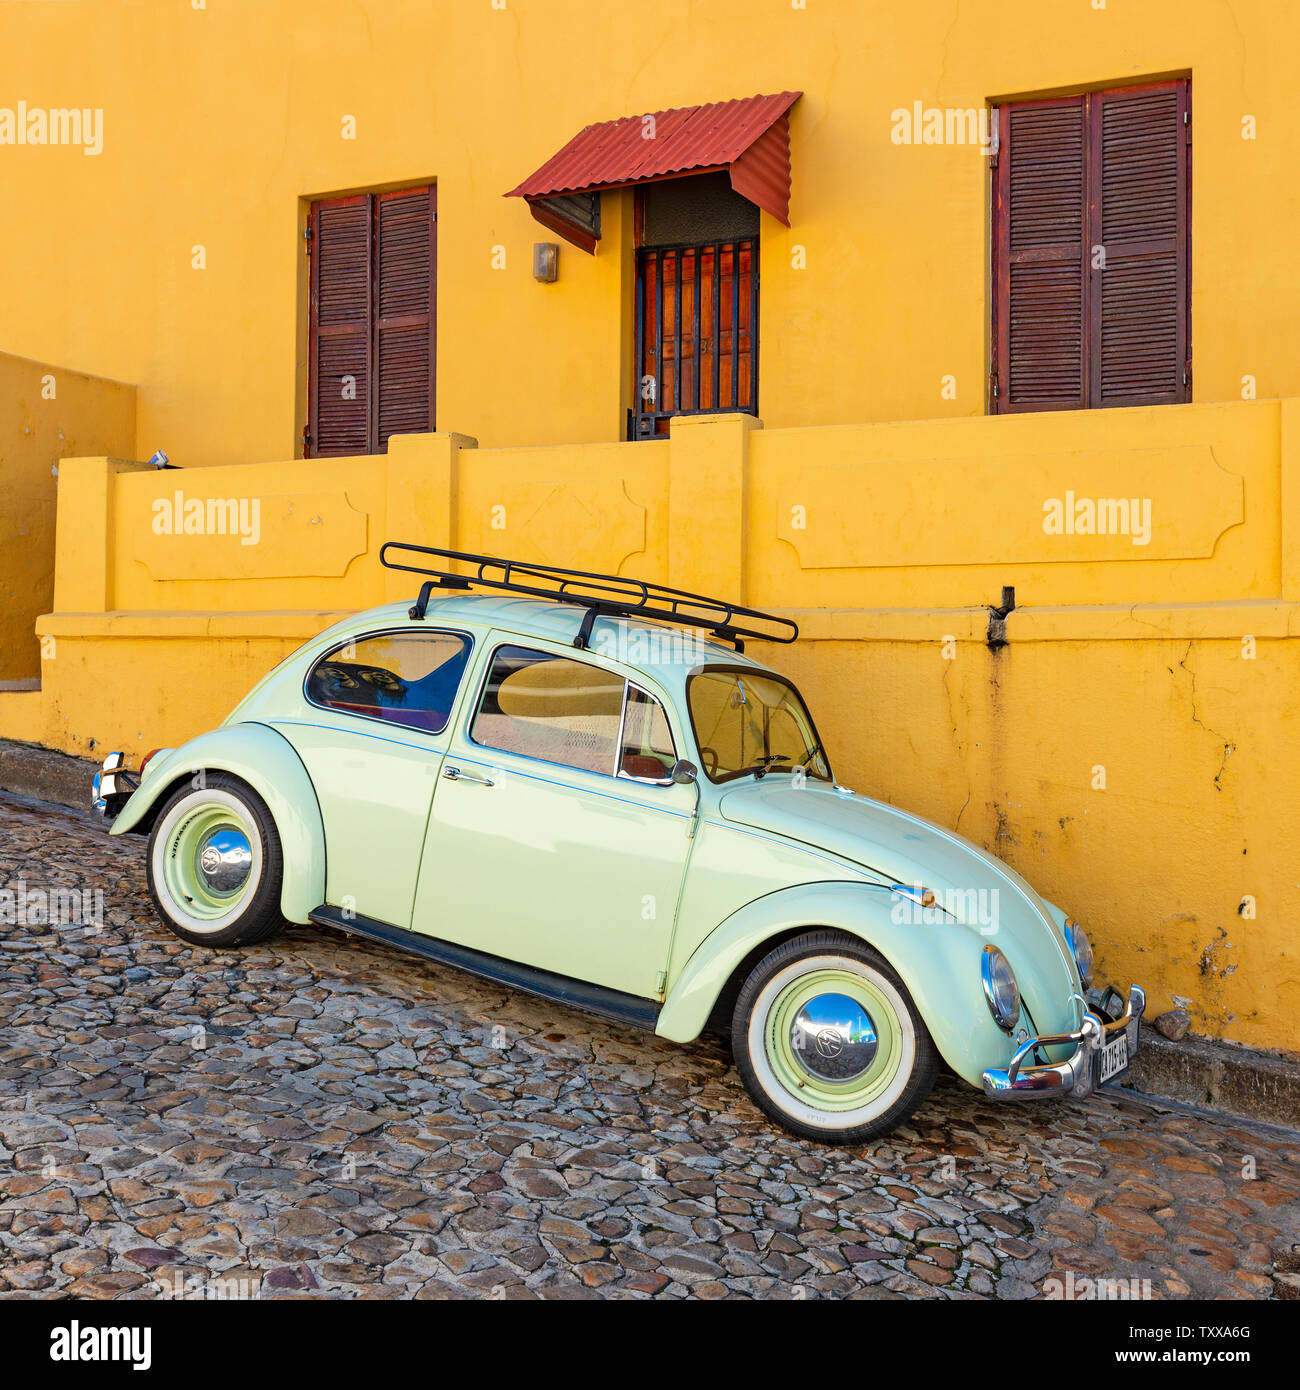 Square photograph of a renovated vintage car or old timer in a colourful street with orange facade of Bo Kaap district, Cape Town, South Africa. Stock Photo